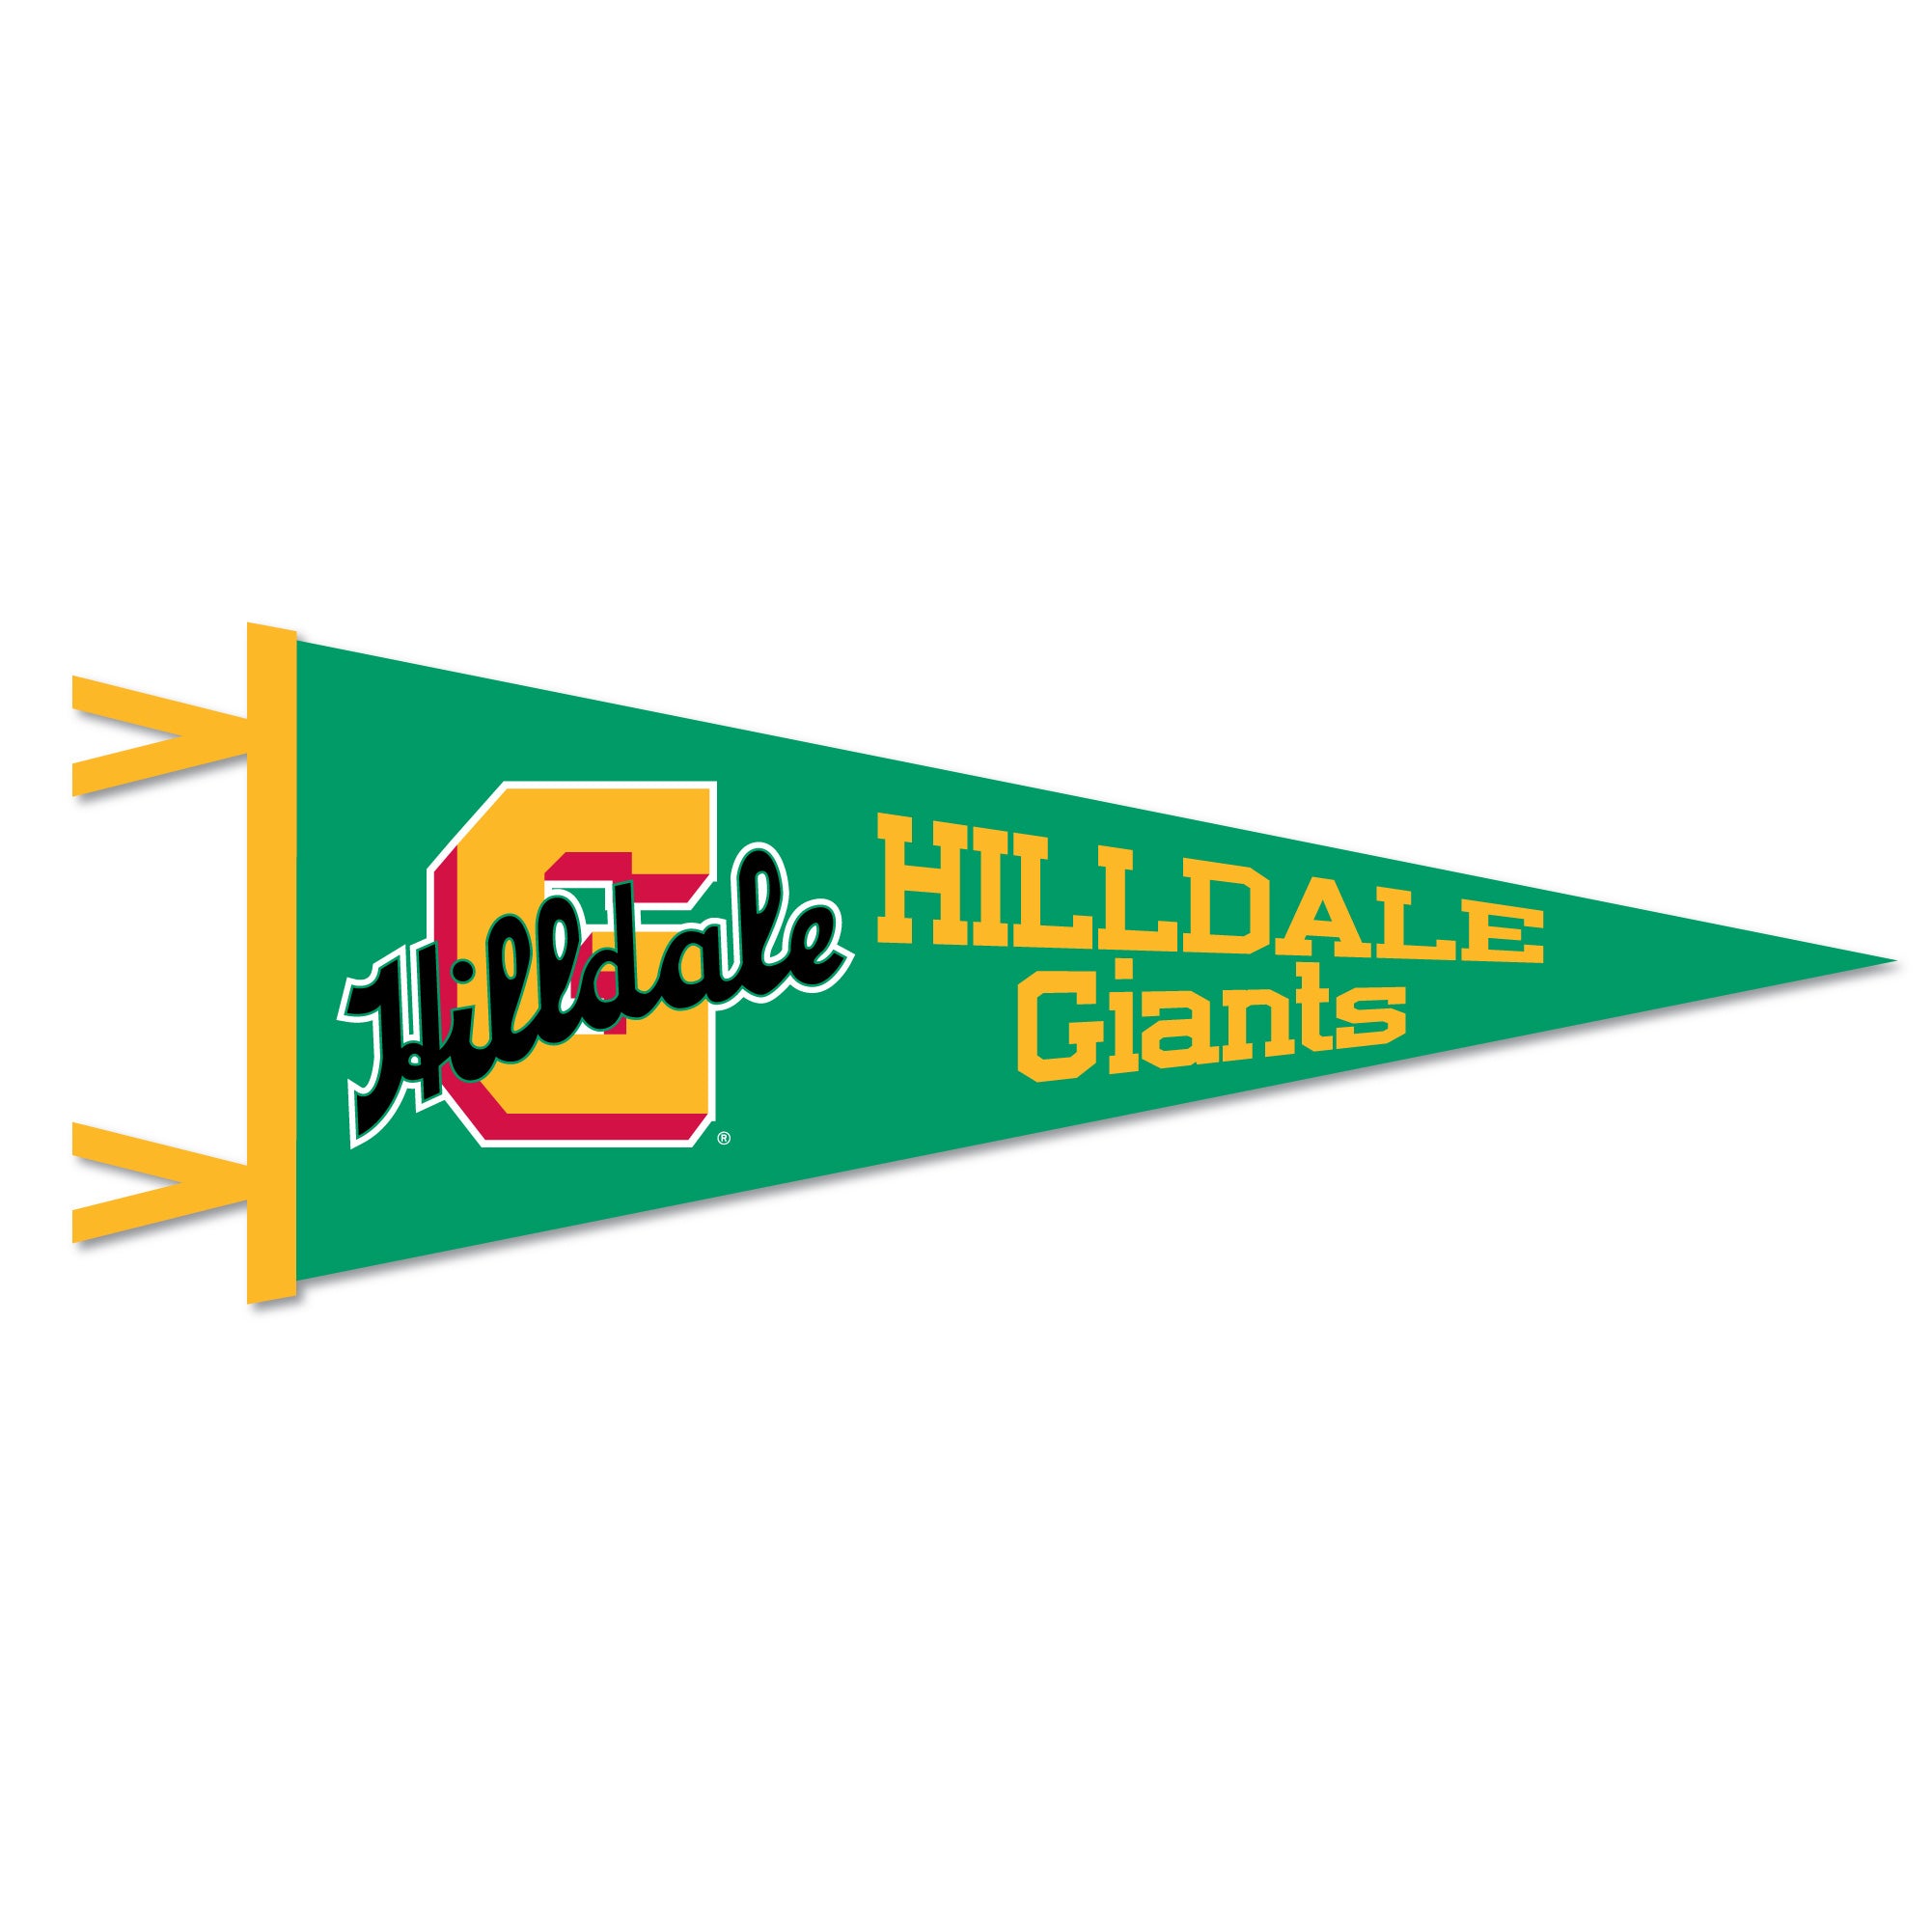 Hilldale Giants Pennant